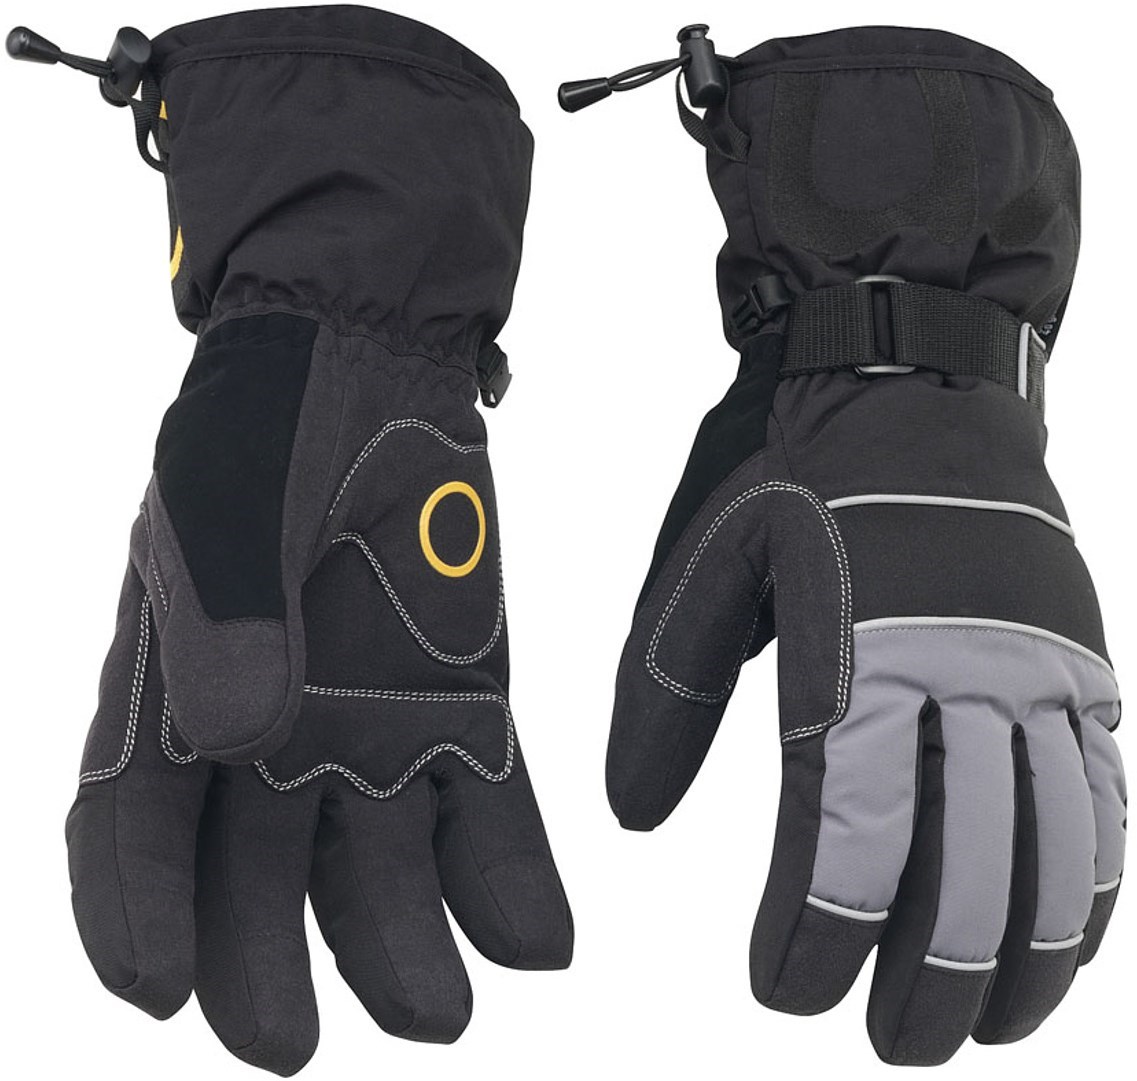 Knog Nomad Full Finger Winter Cycling GLoves product image